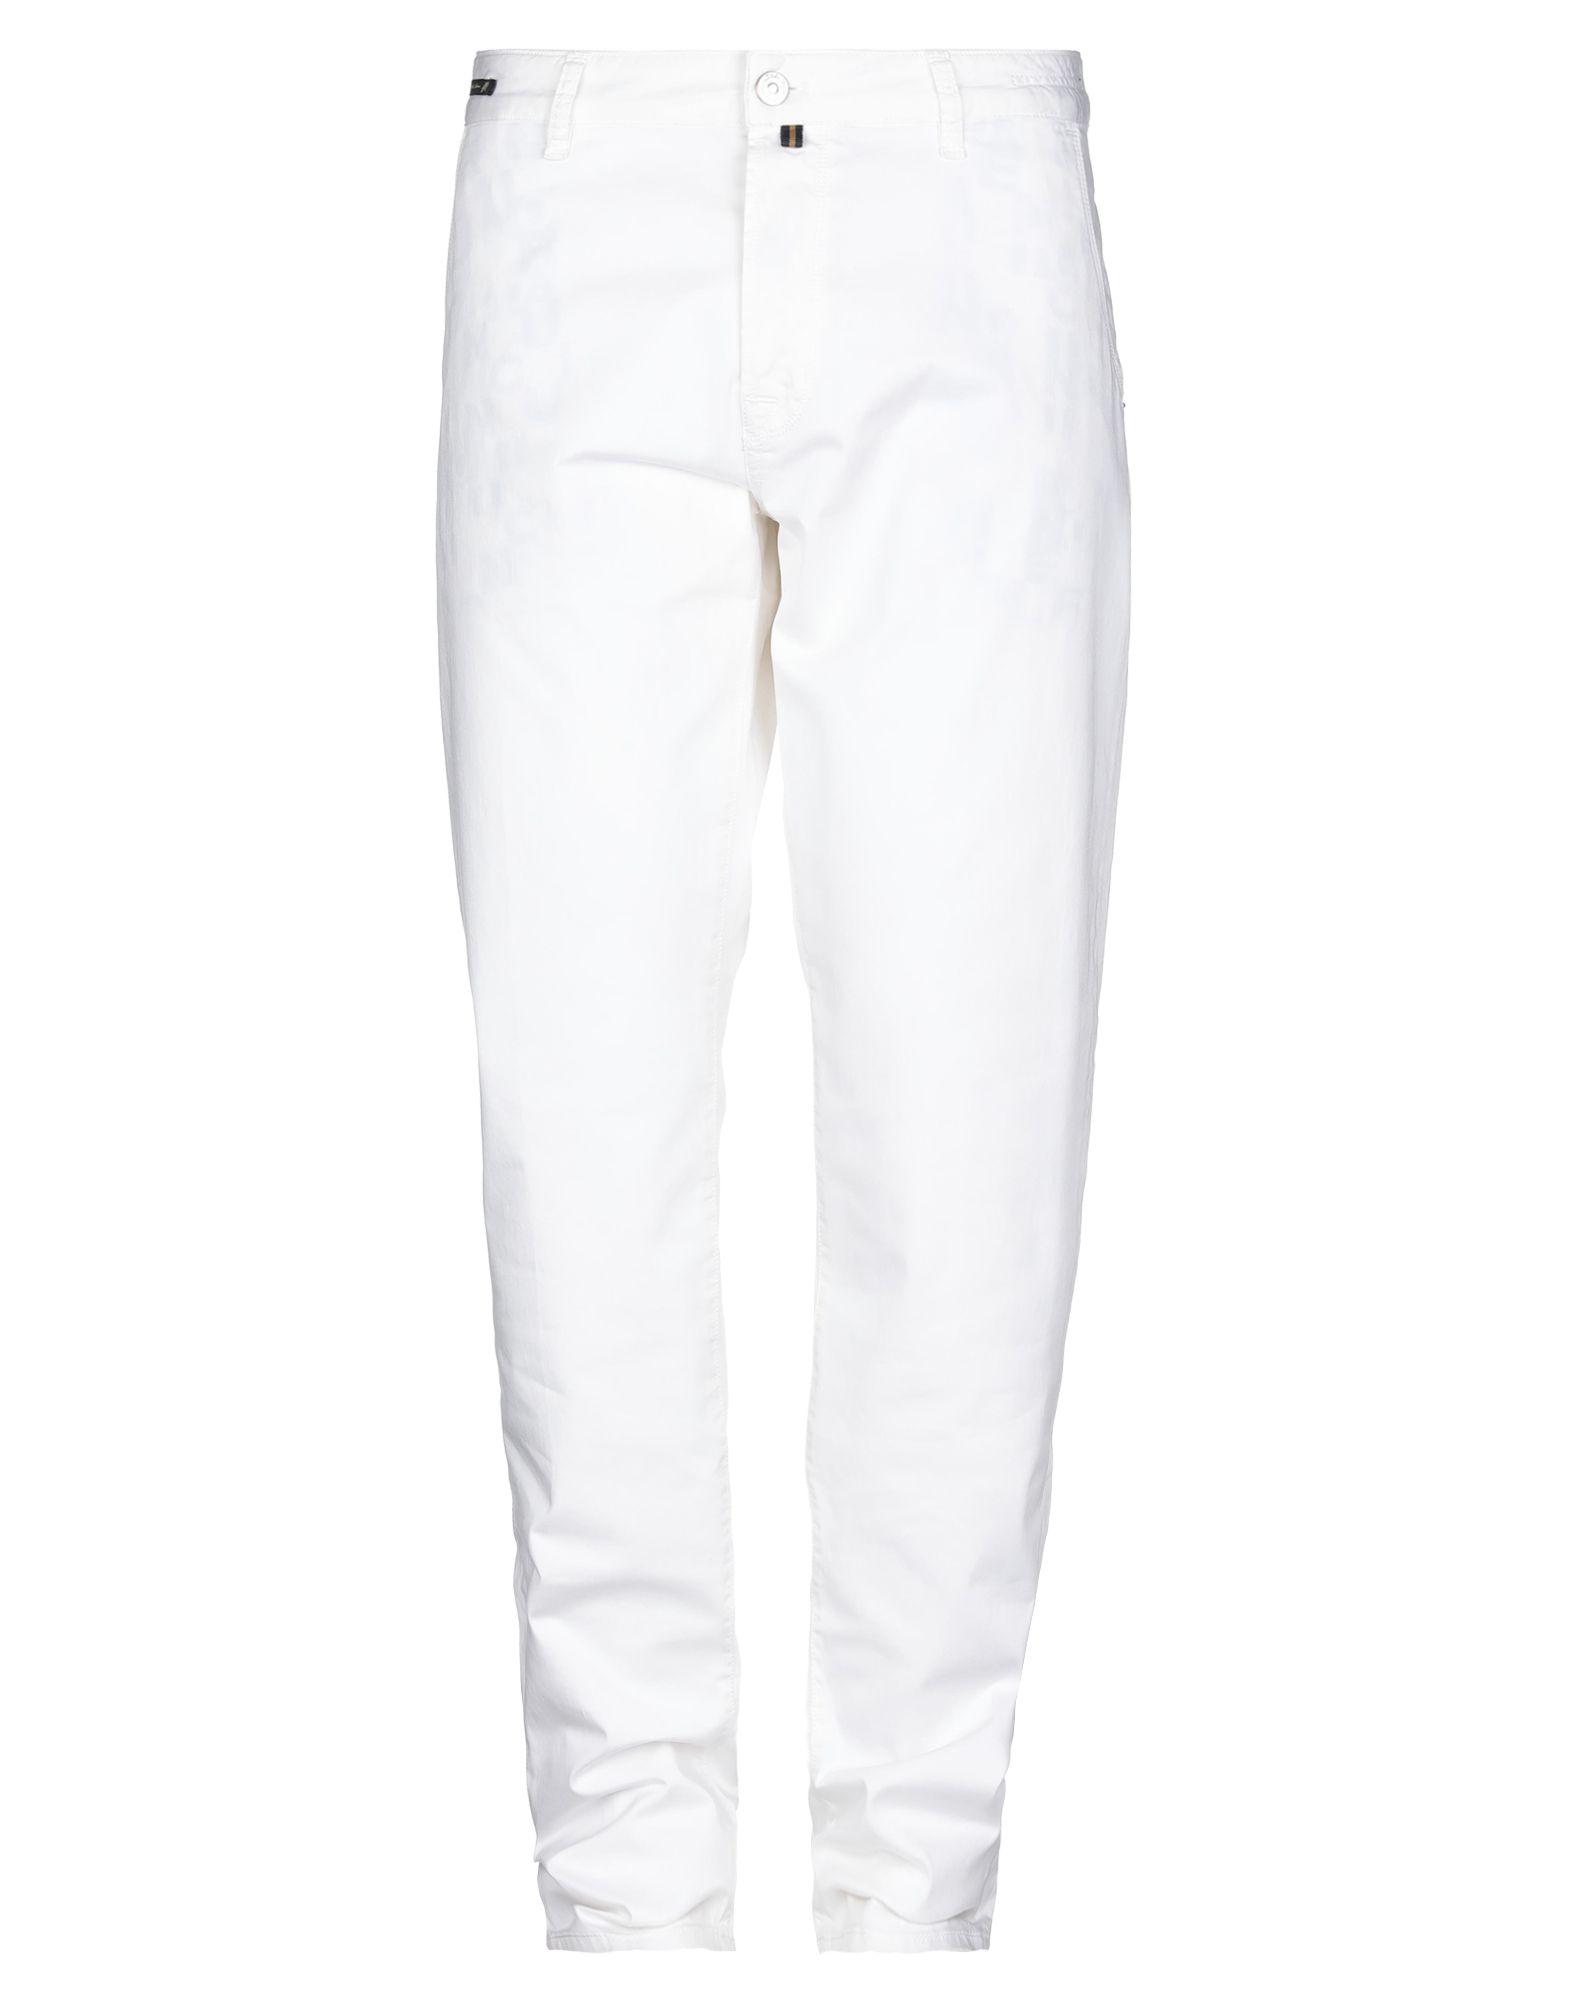 Pt05 Leather Casual Pants in White for Men - Lyst